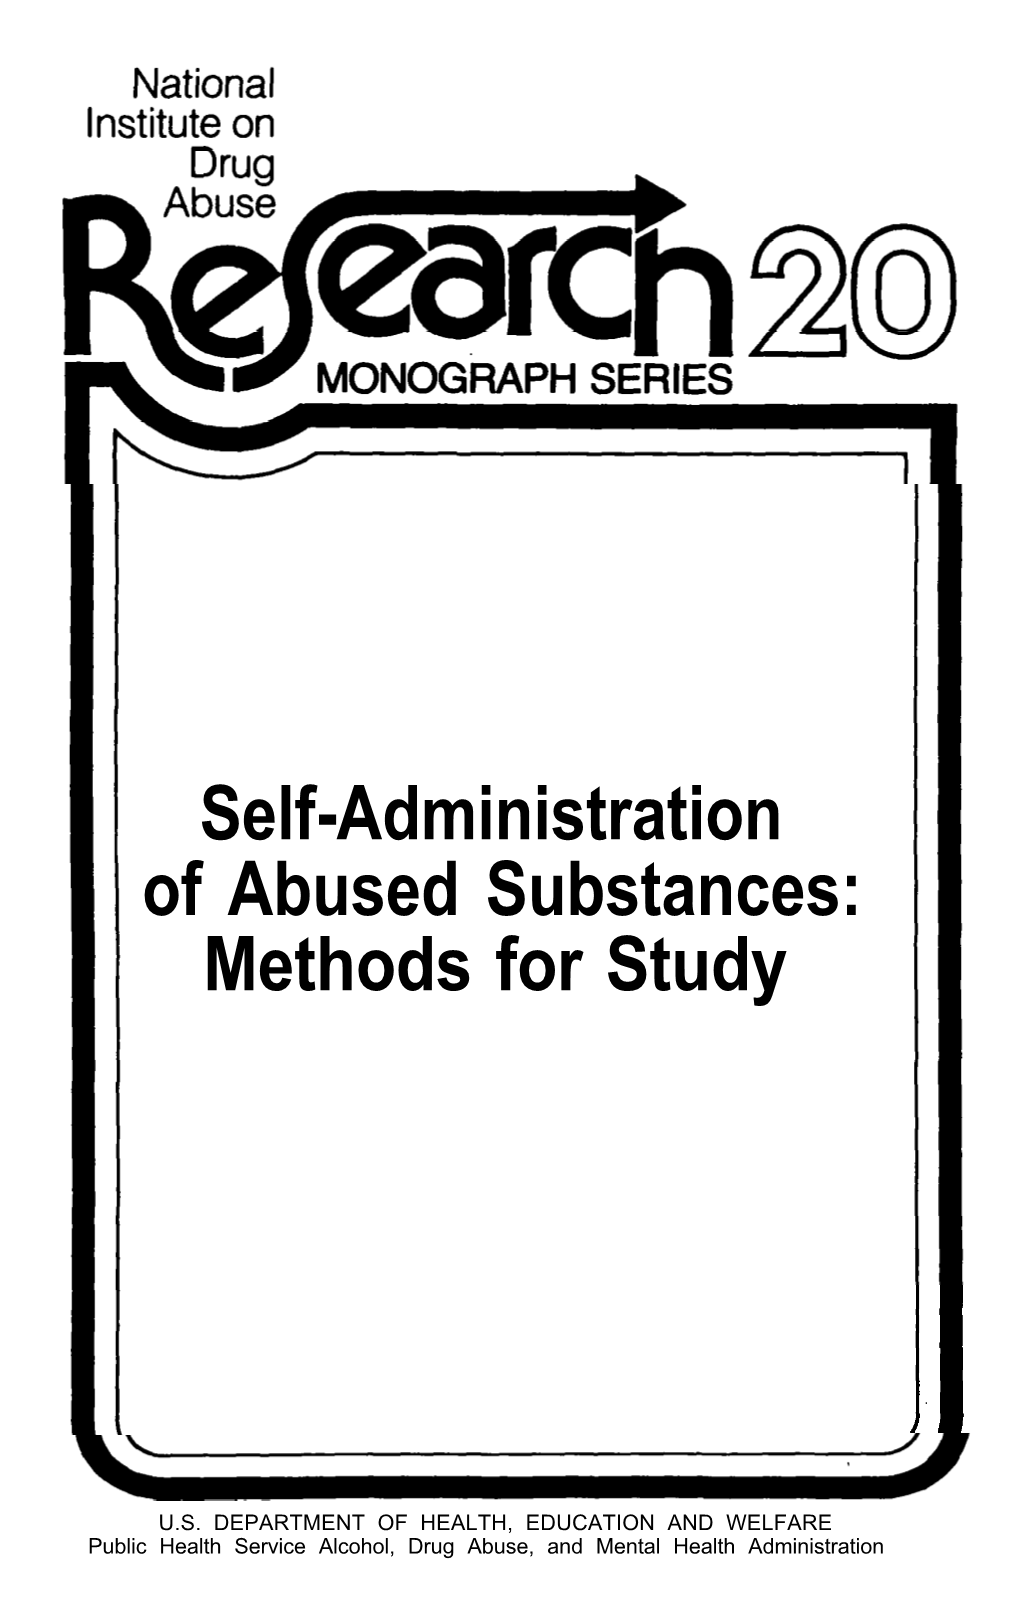 Self-Administration of Abused Substances: Methods for Study